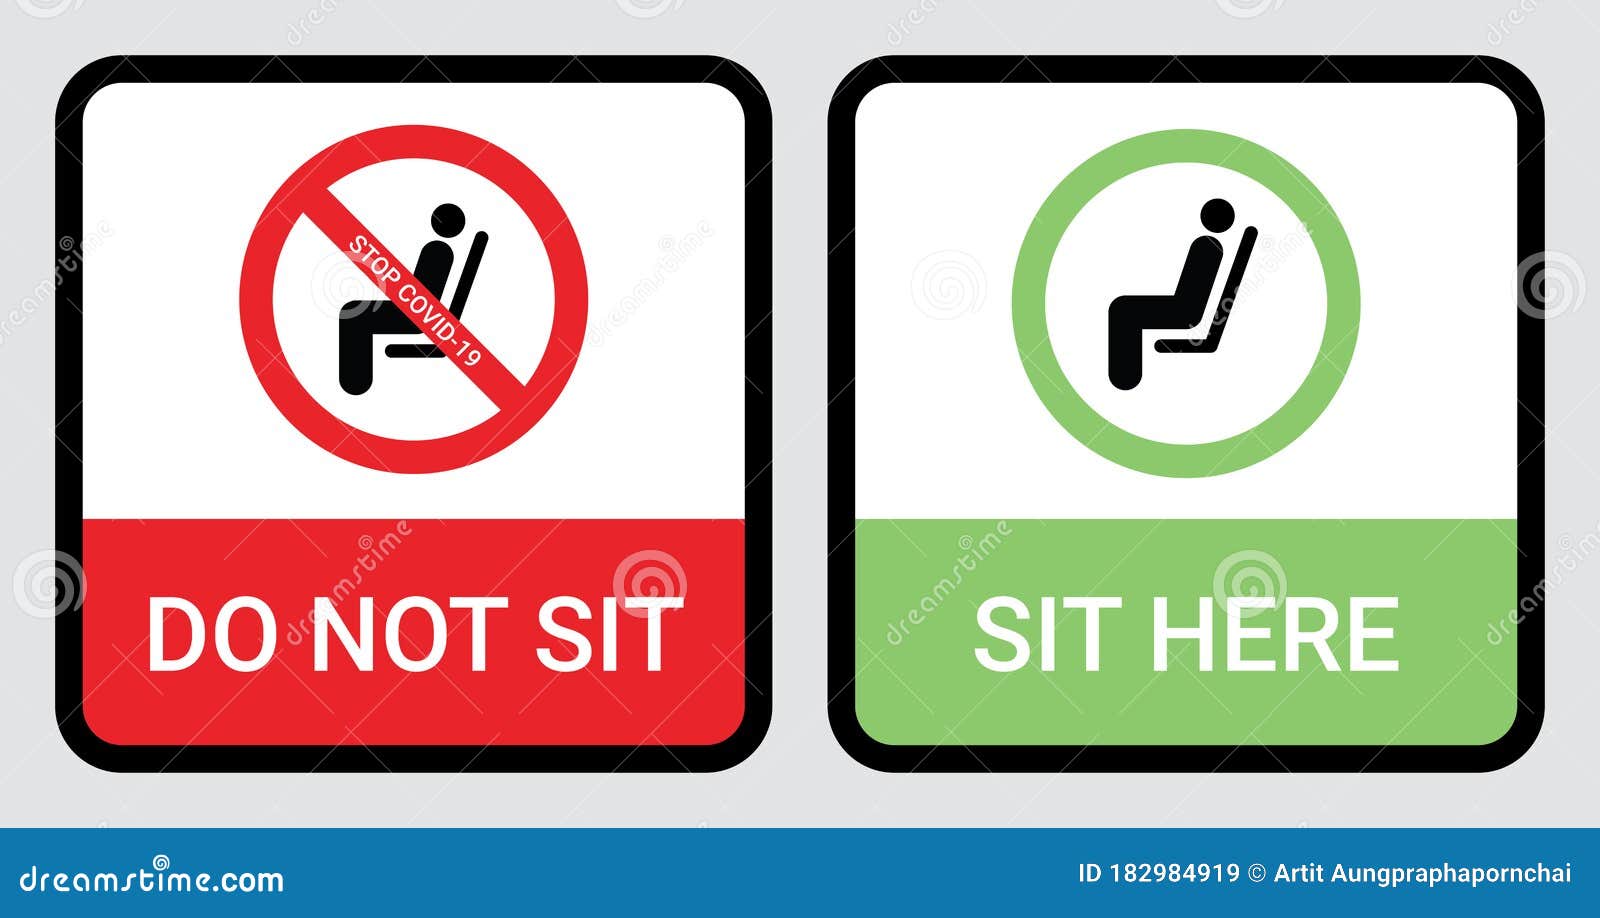 please do not sit and sit here sign to prevent from coronavirus or covid-19 pandemic. keep distance 6 feet or 2 meters physical